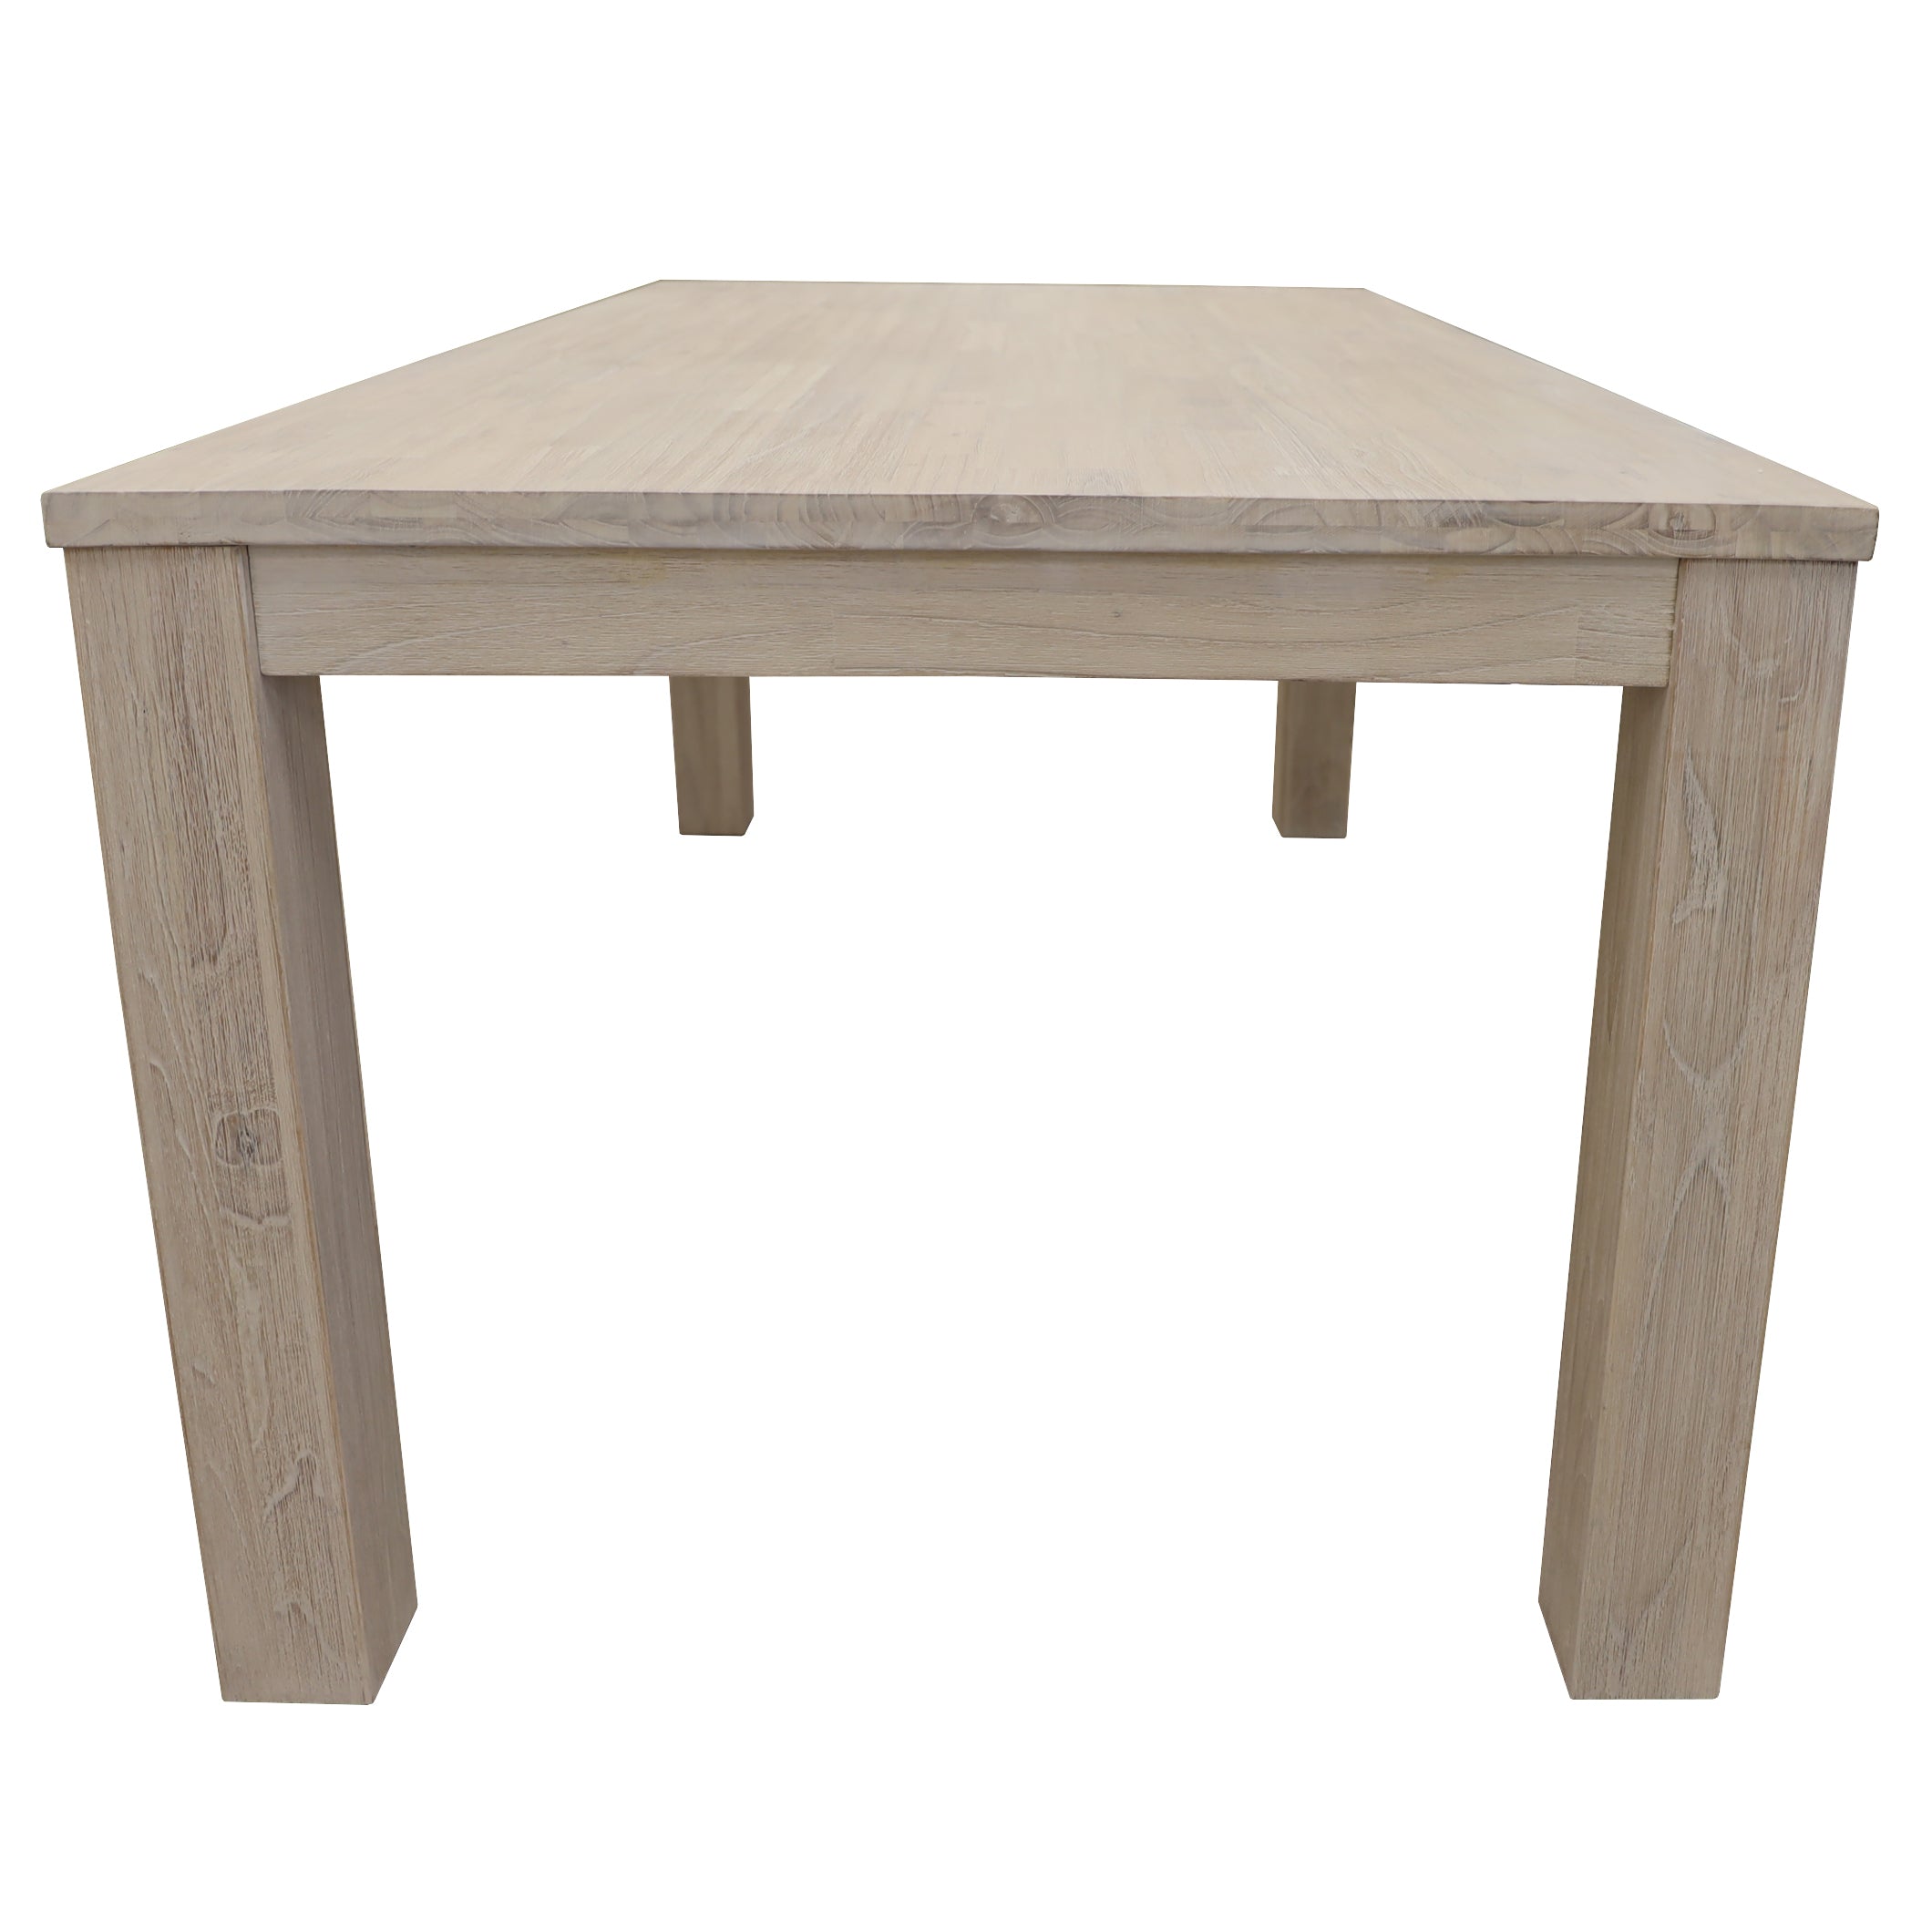 Foxglove Dining Table 190cm Solid Mt Ash Wood Home Dinner Furniture - White